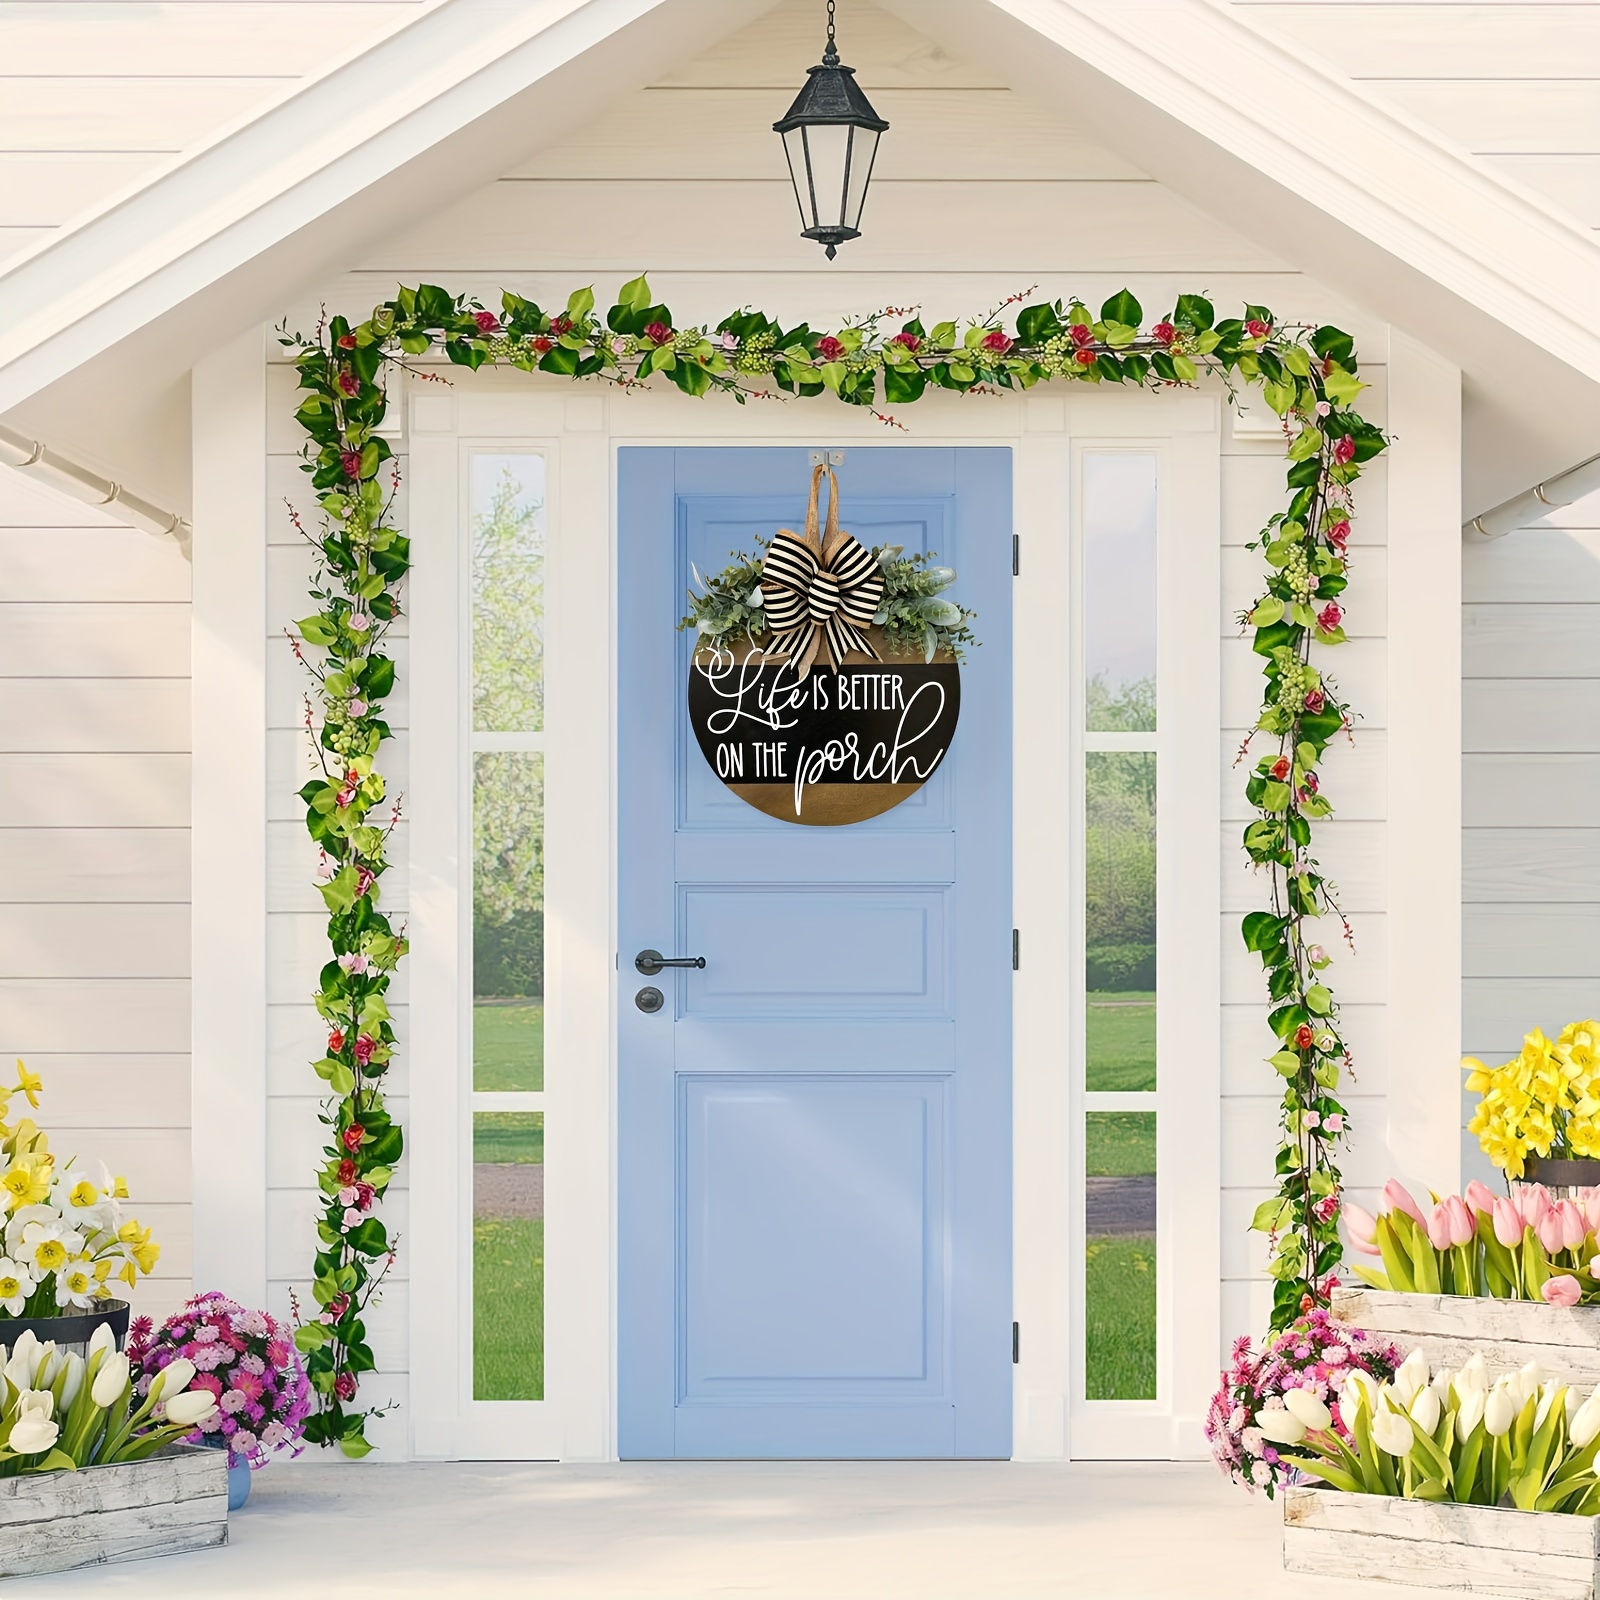 

1pc, Enhance Your Front Door With Beautiful Decorations Such As Door Wreaths, Porch Signs, And Coat Racks To Make Your Porch A More Pleasant Living Space All Year Round.